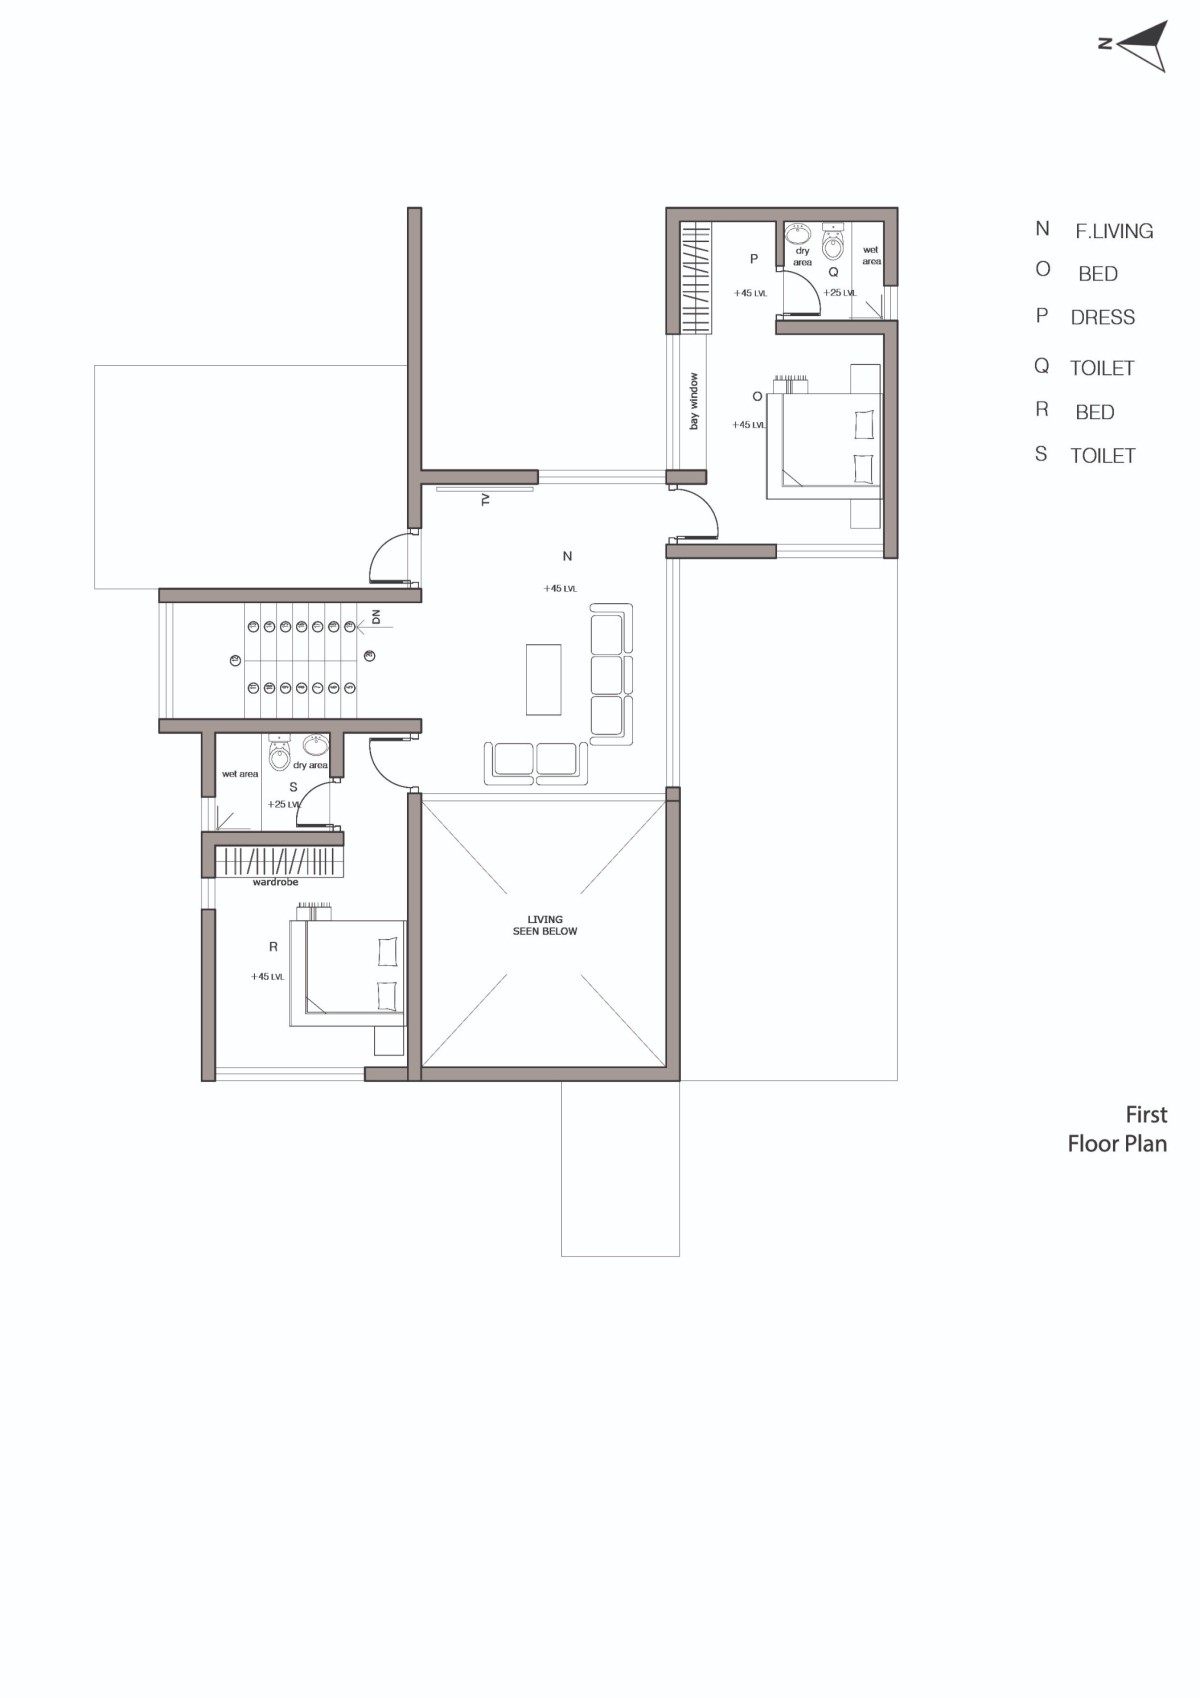 First Floor Plan of The Levelscape by Nestcraft Architecture